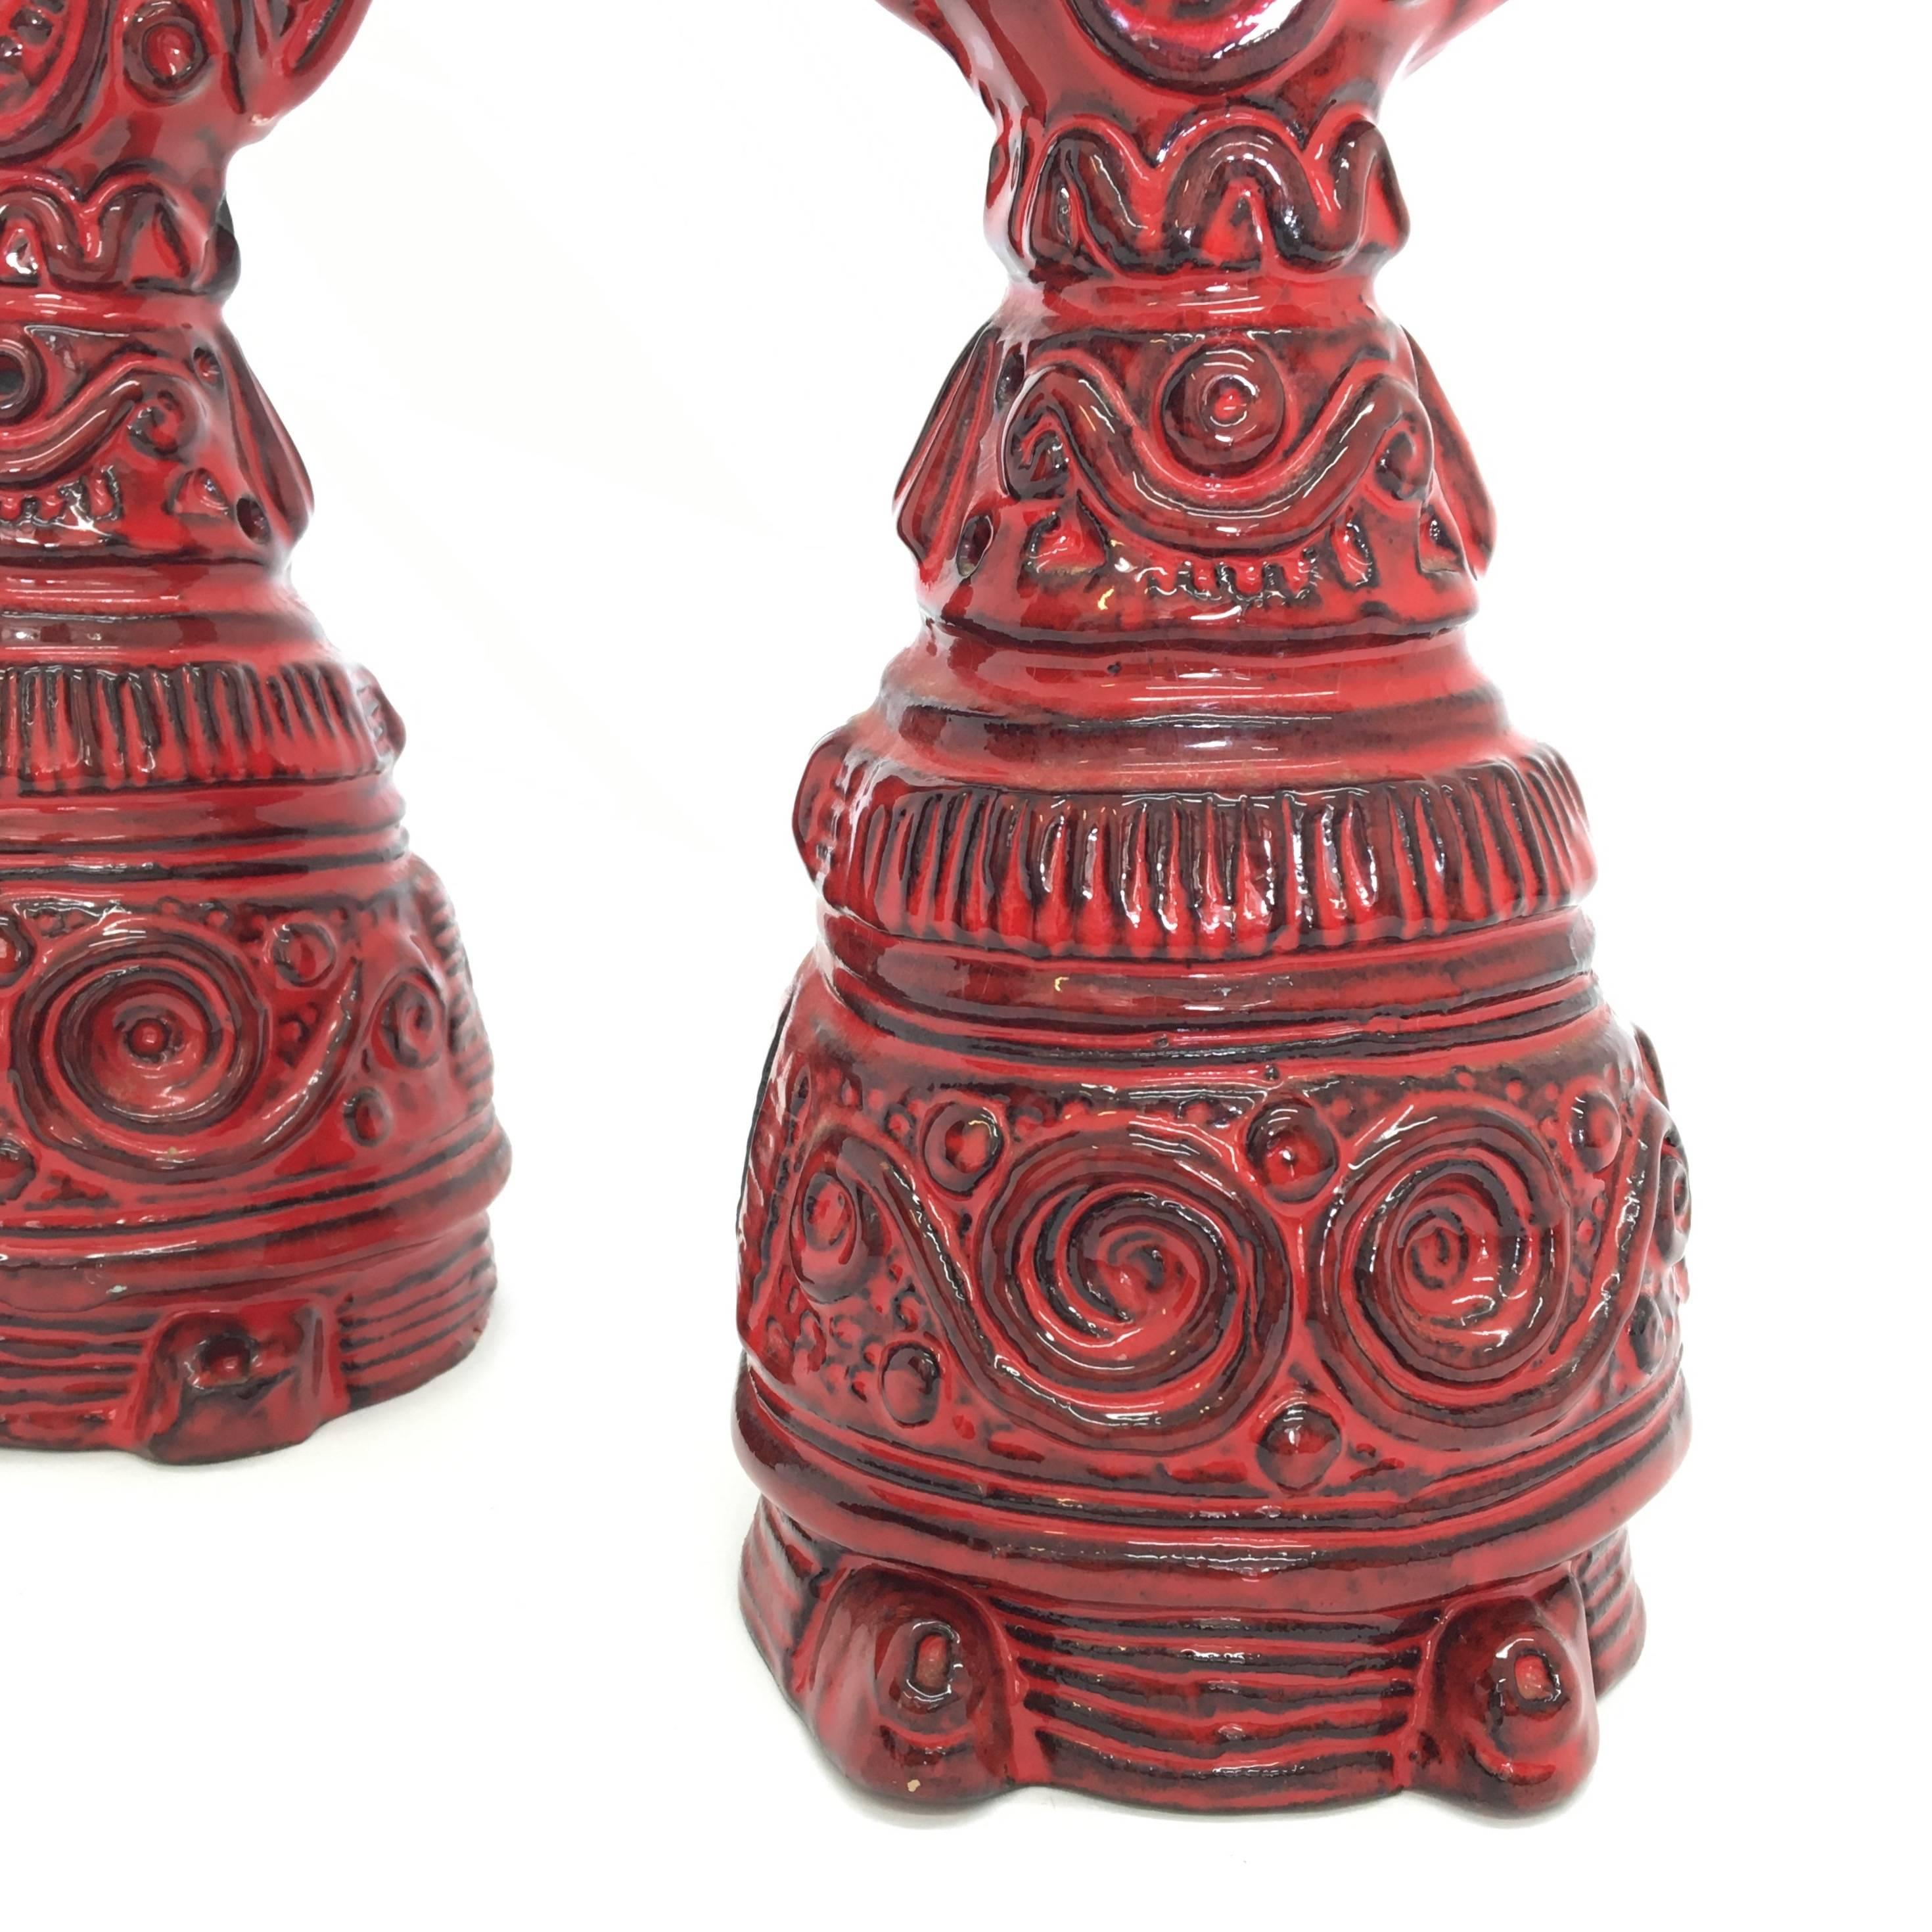 Pair of very rare Bitossi candlestick figurines in red.